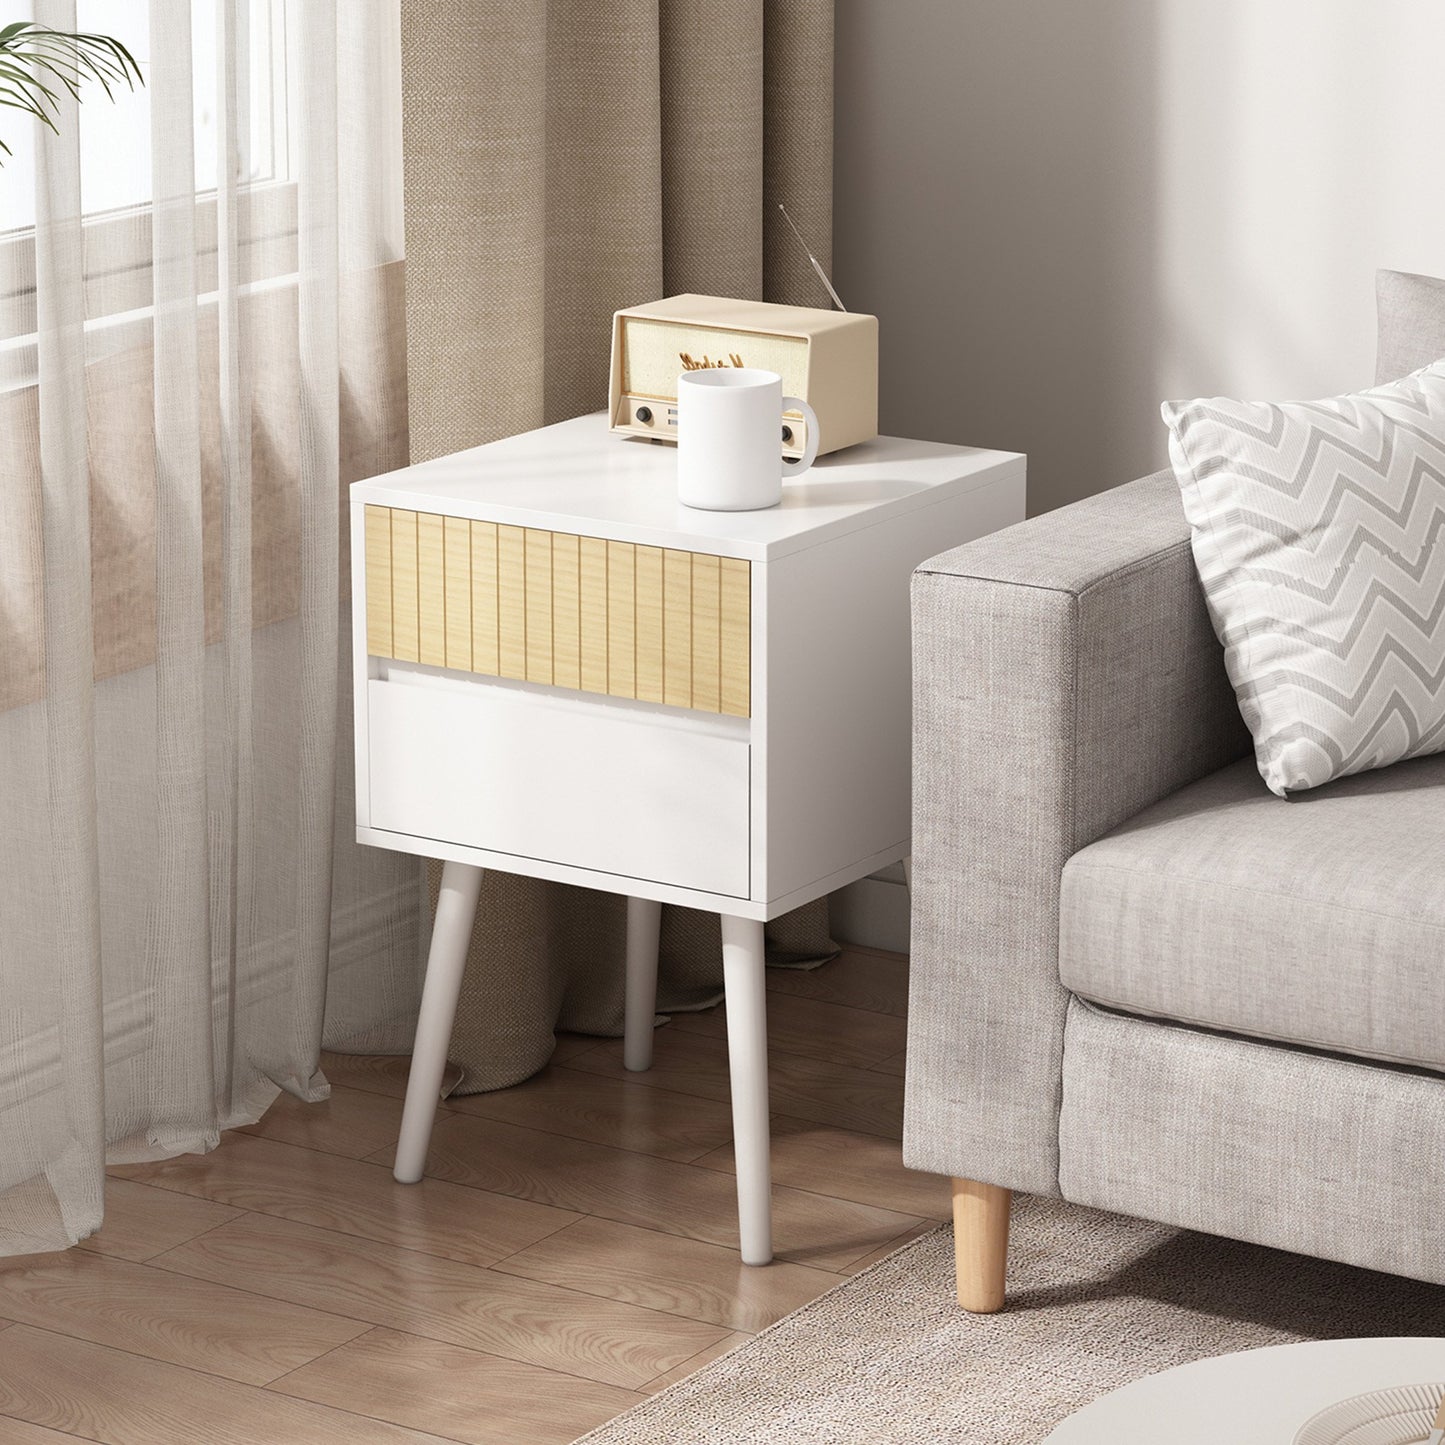 Sarantino Clio Bedside Table Night Stand - White/natural